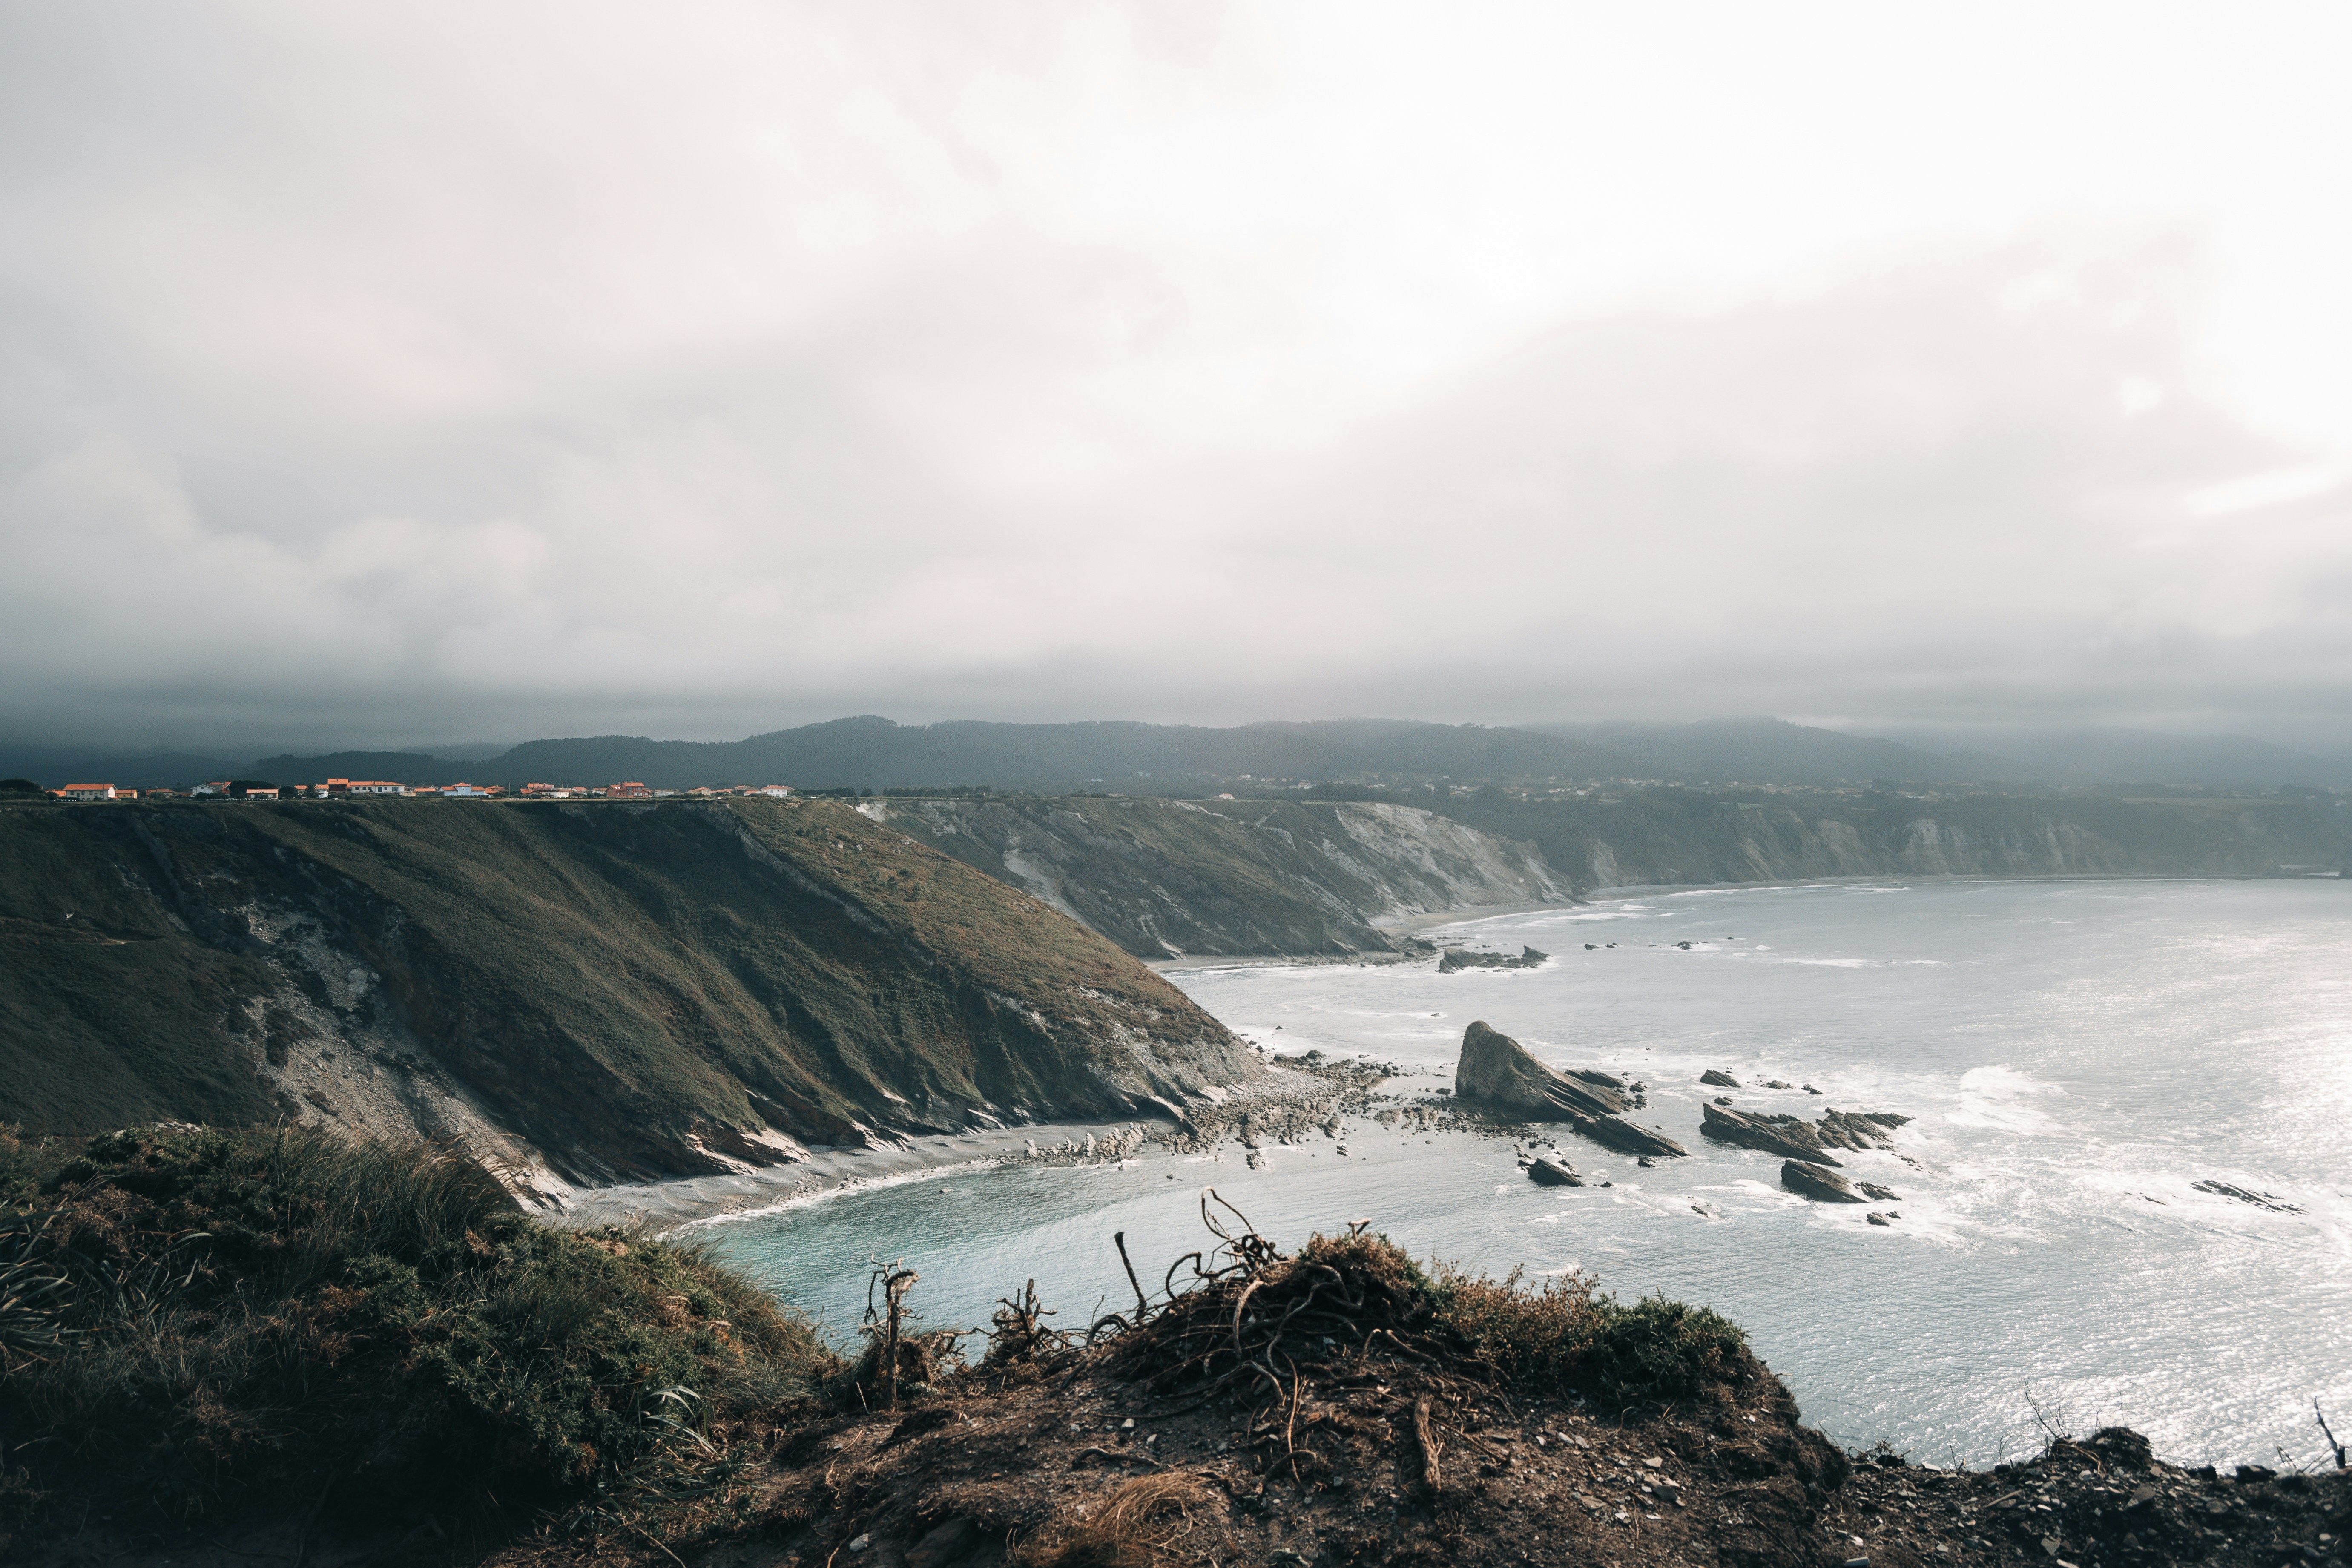 Choose from a curated selection of landscape photos. Always free on Unsplash.